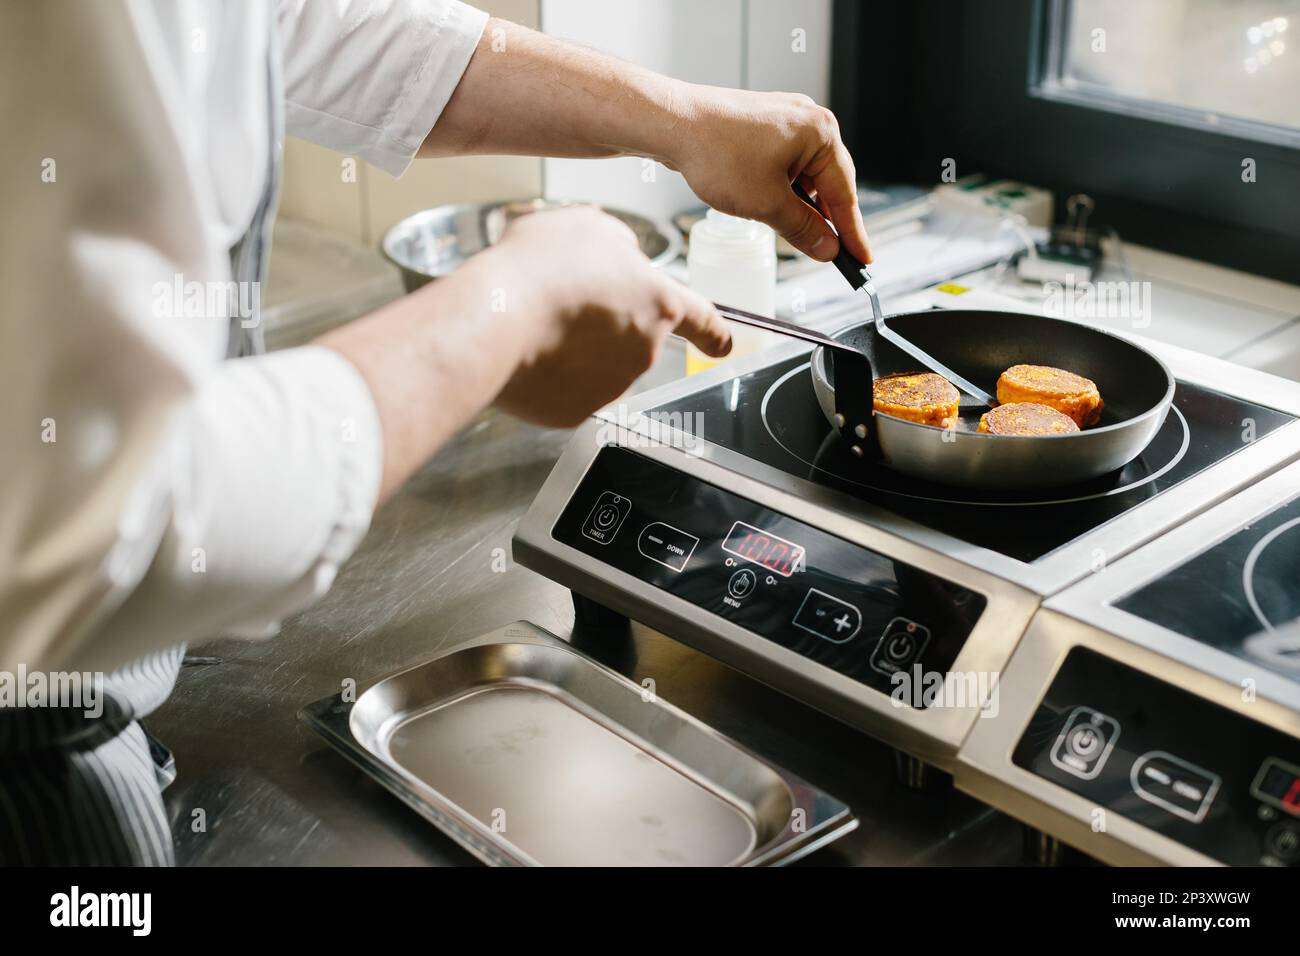 The concept of cooking, professions and people. Male chef frying carrot pancakes in restaurant kitchen. Stock Photo